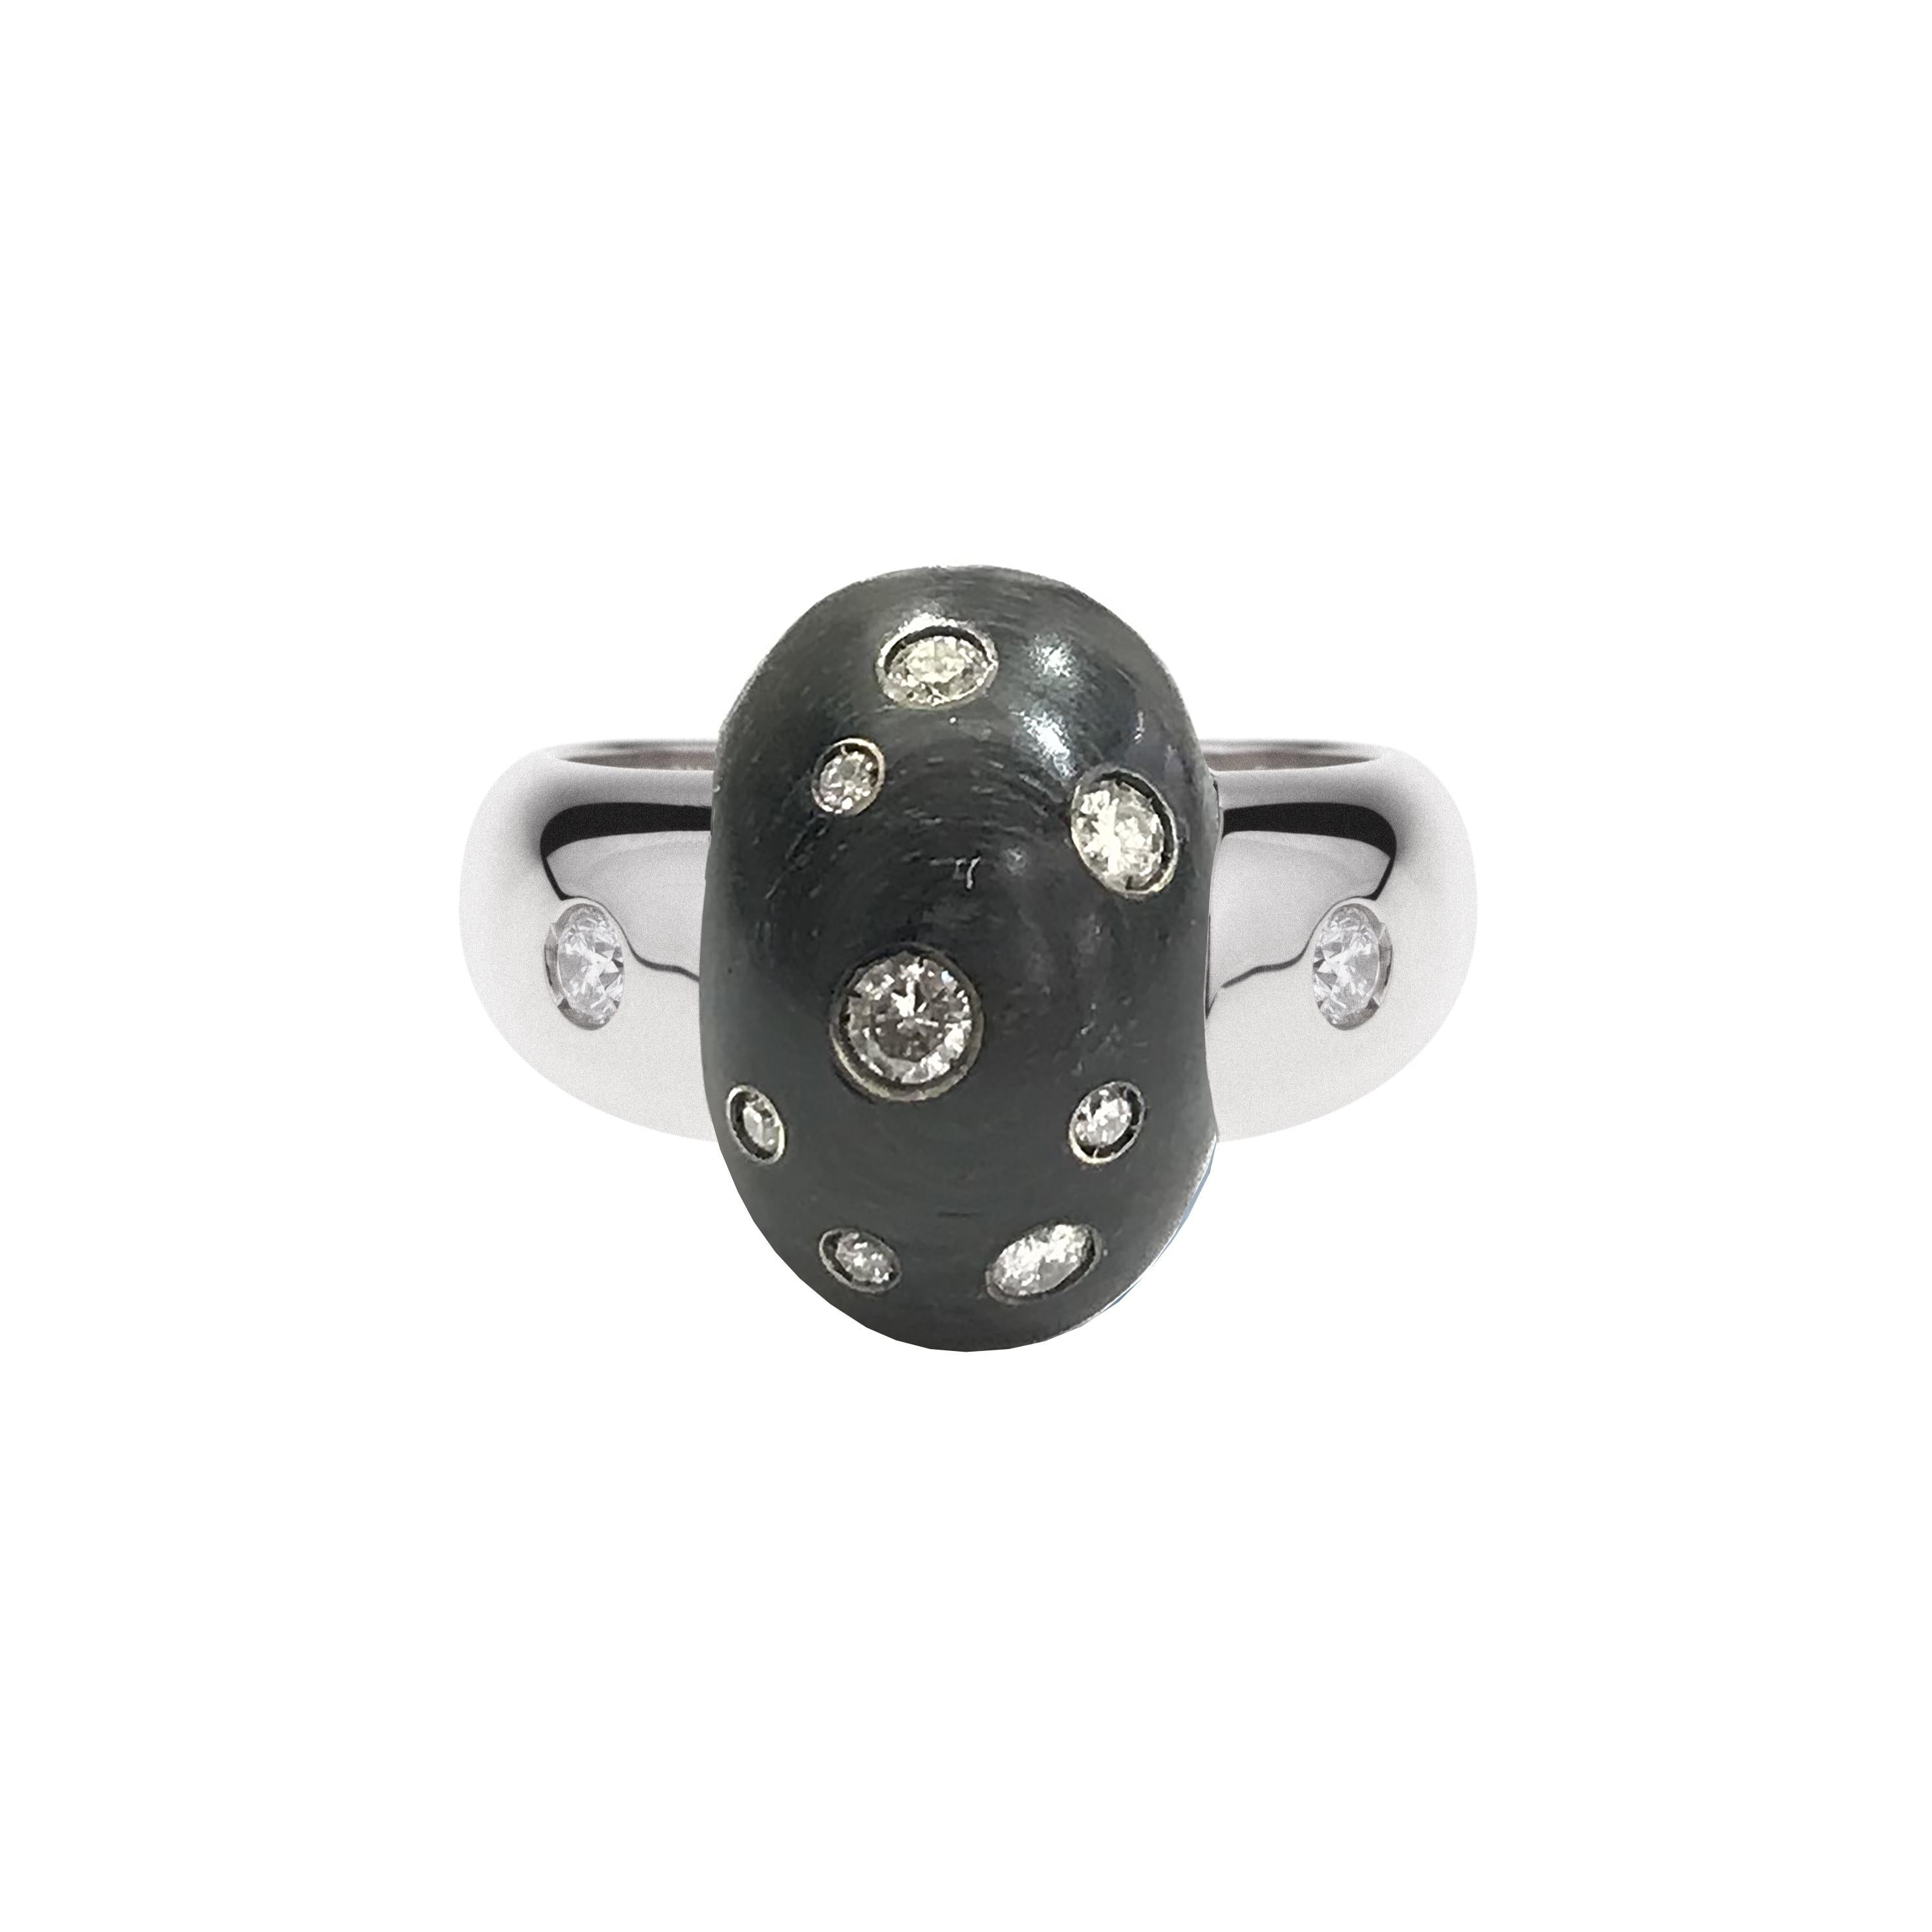 Embrace Collection by Angeletti. White Gold Ring With Diamonds set on Black Carbon Cabochon.
Iconic Embrace Model, Designed and Manifactured in Rome.
White Gold Ring with Diamonds (ariround ct. 1) on a Black Carbon Cabochon. On the side of the ring,